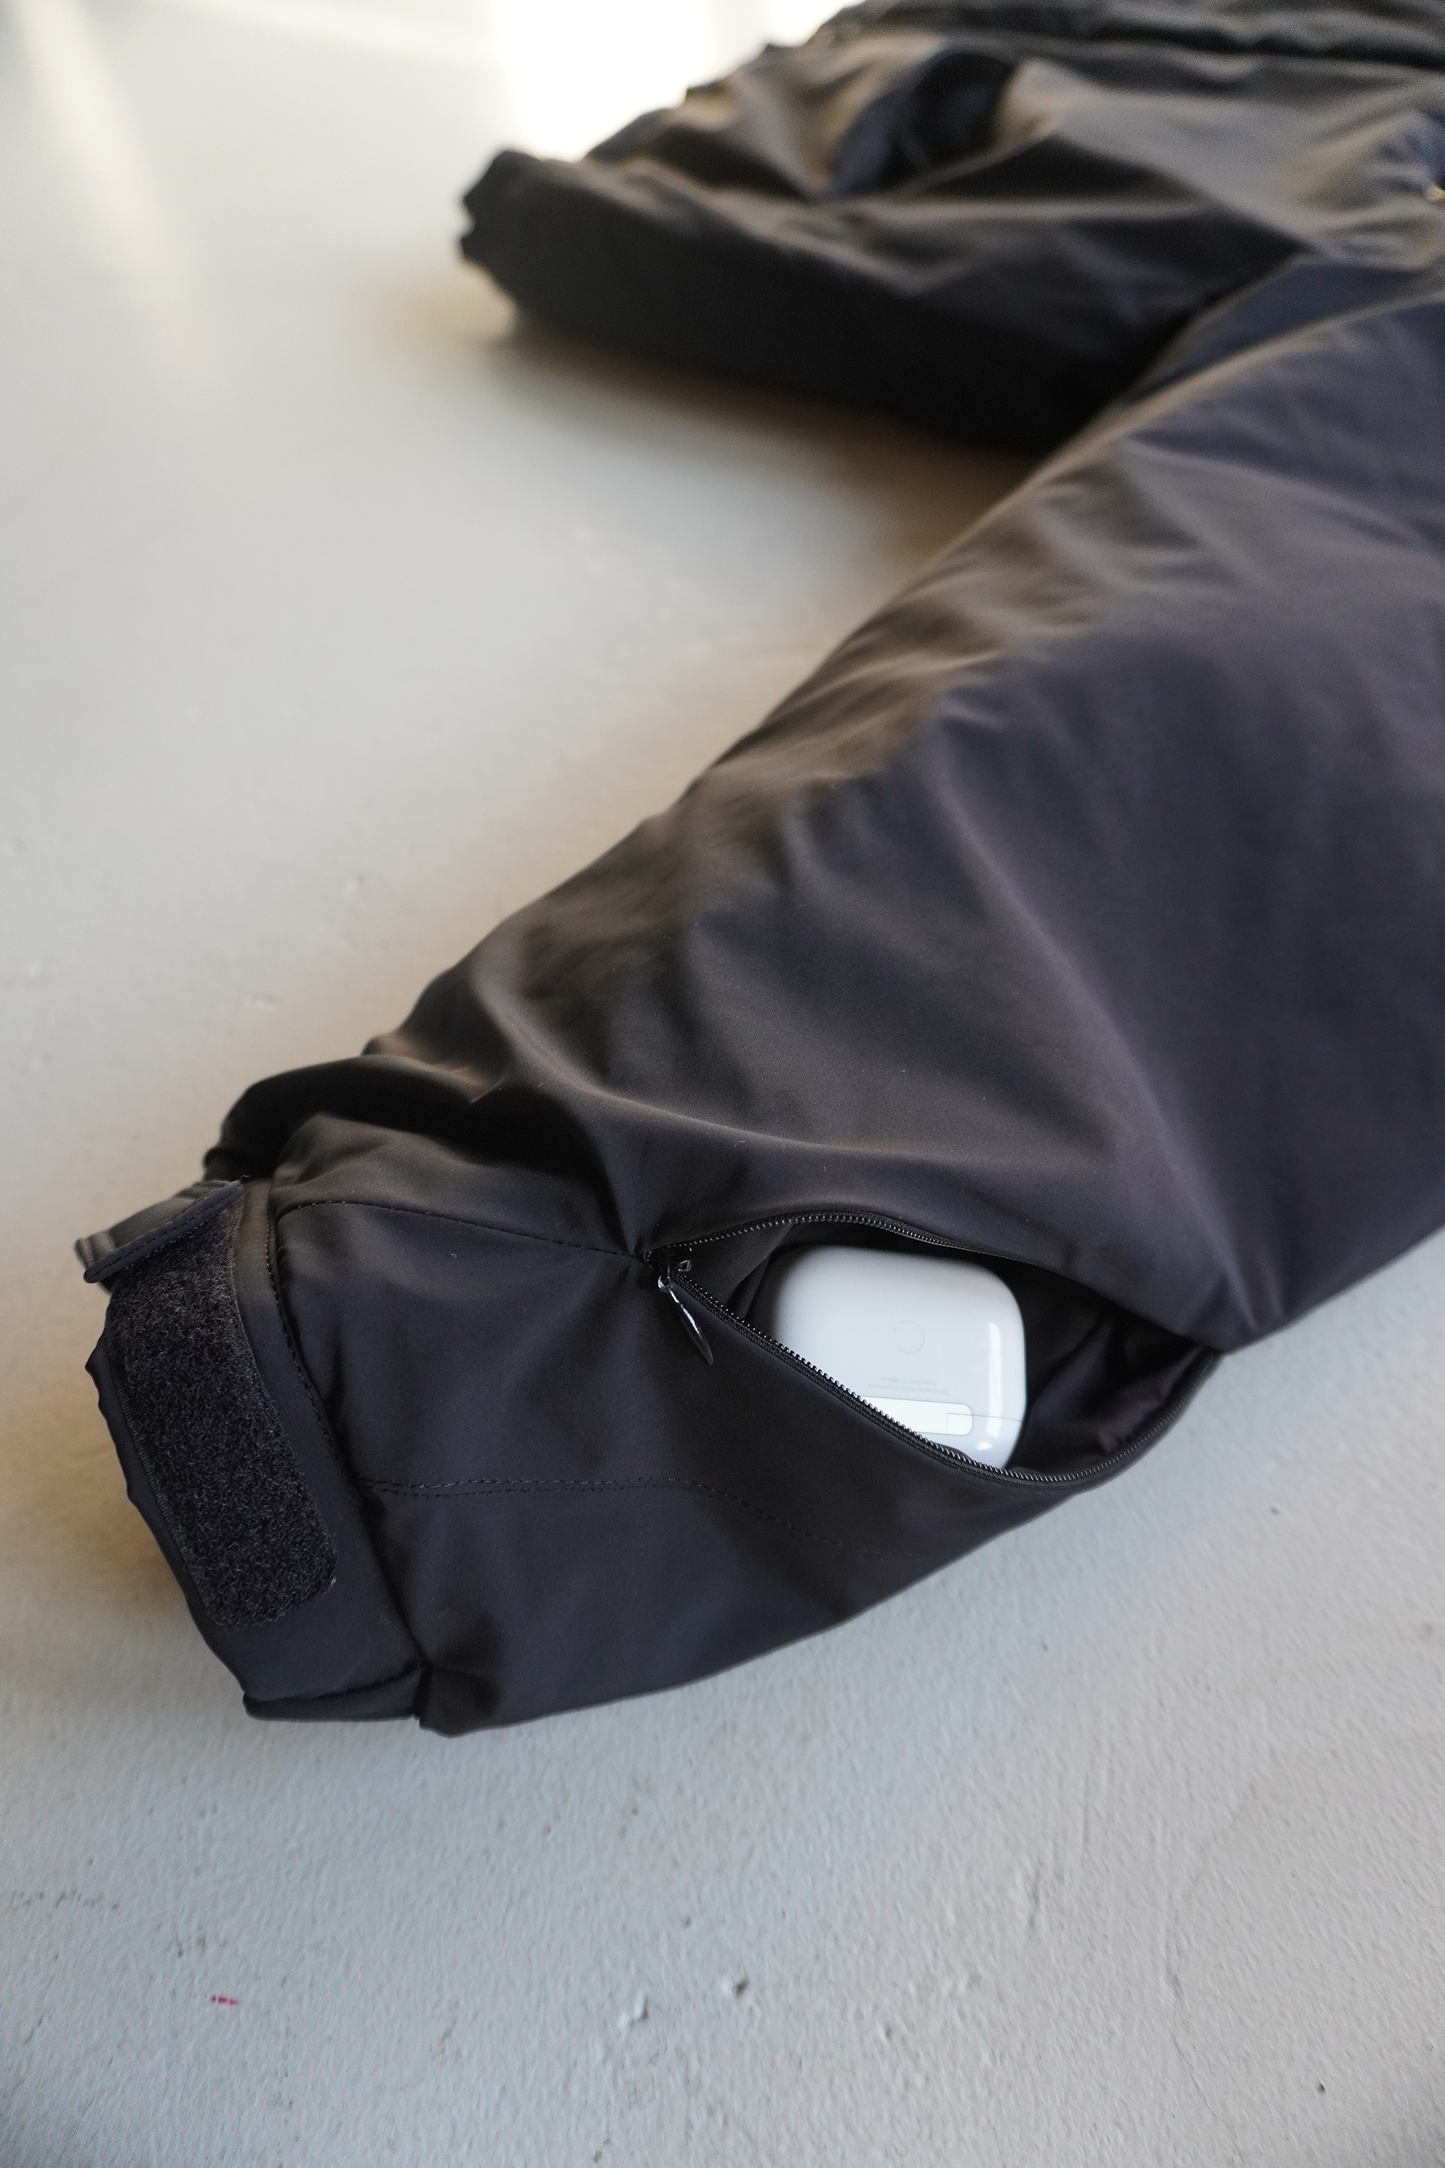 WATER PROOF PUFF JACKET